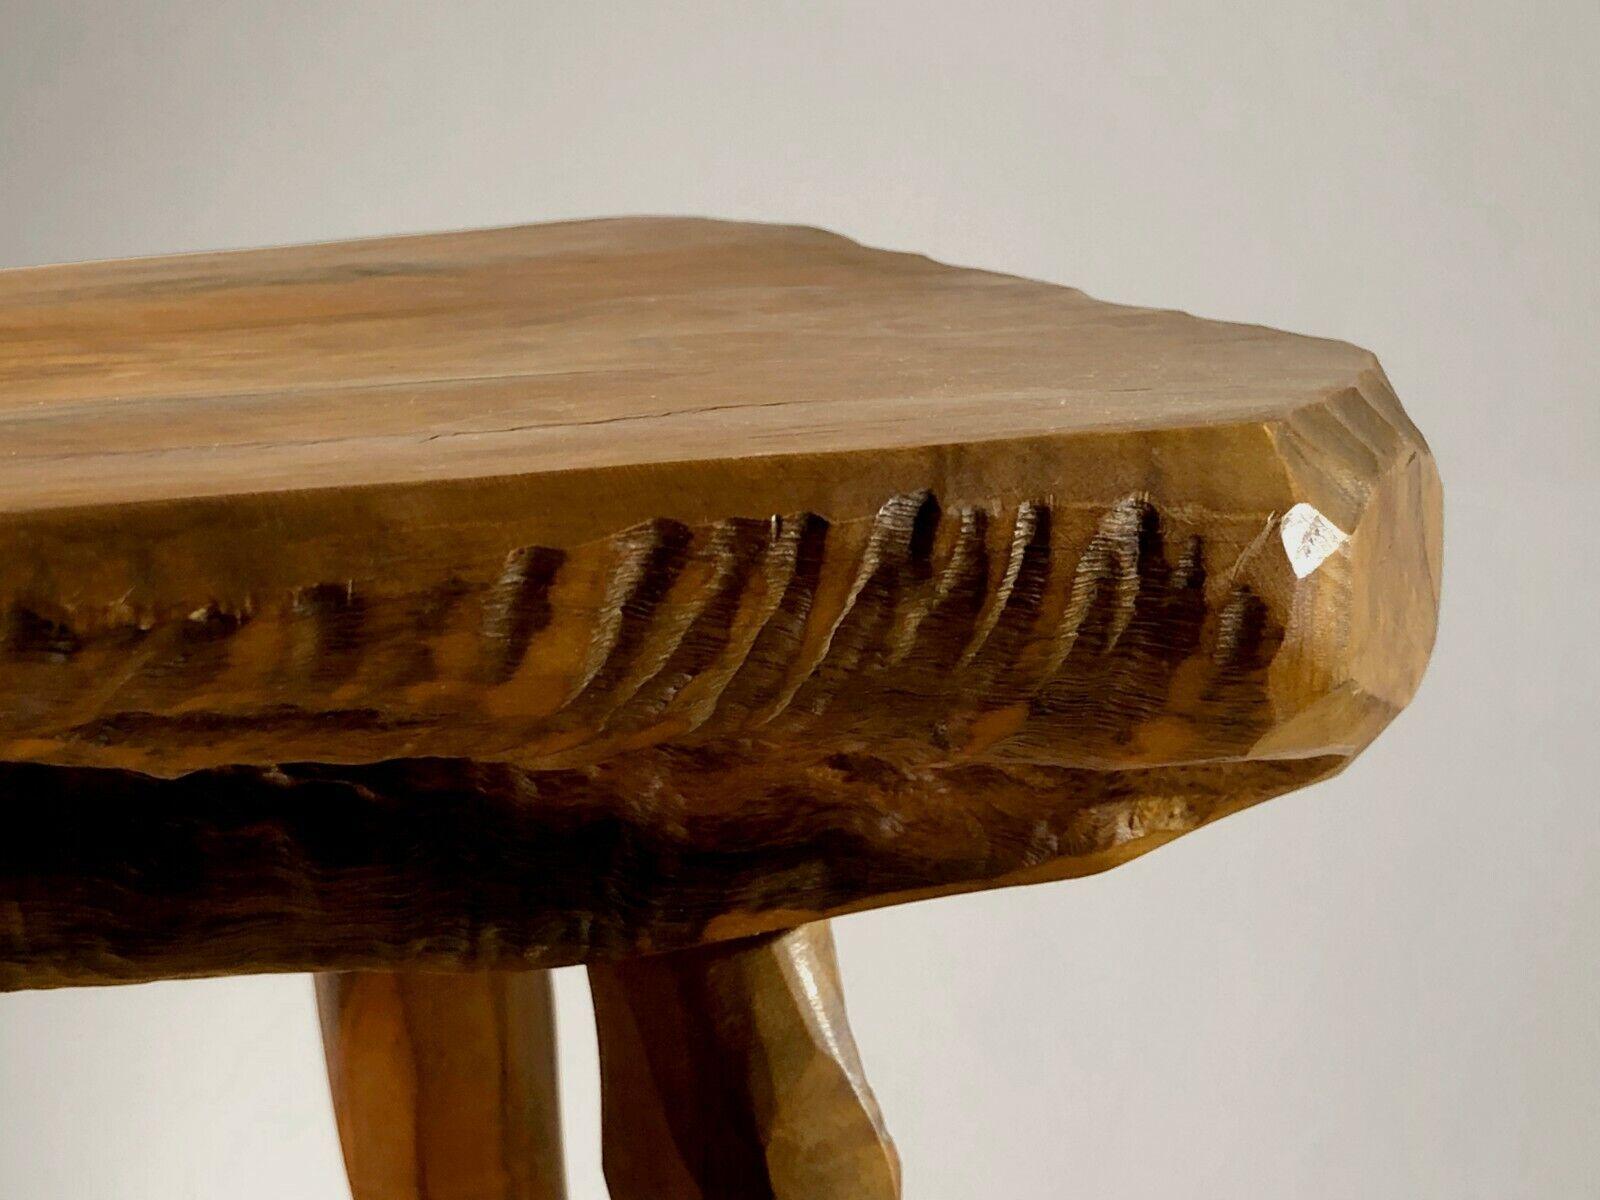 A BRUTALIST MID-CENTURY-MODERN RUSTIC STOOL, MAROLLES Style, France 1950 For Sale 1